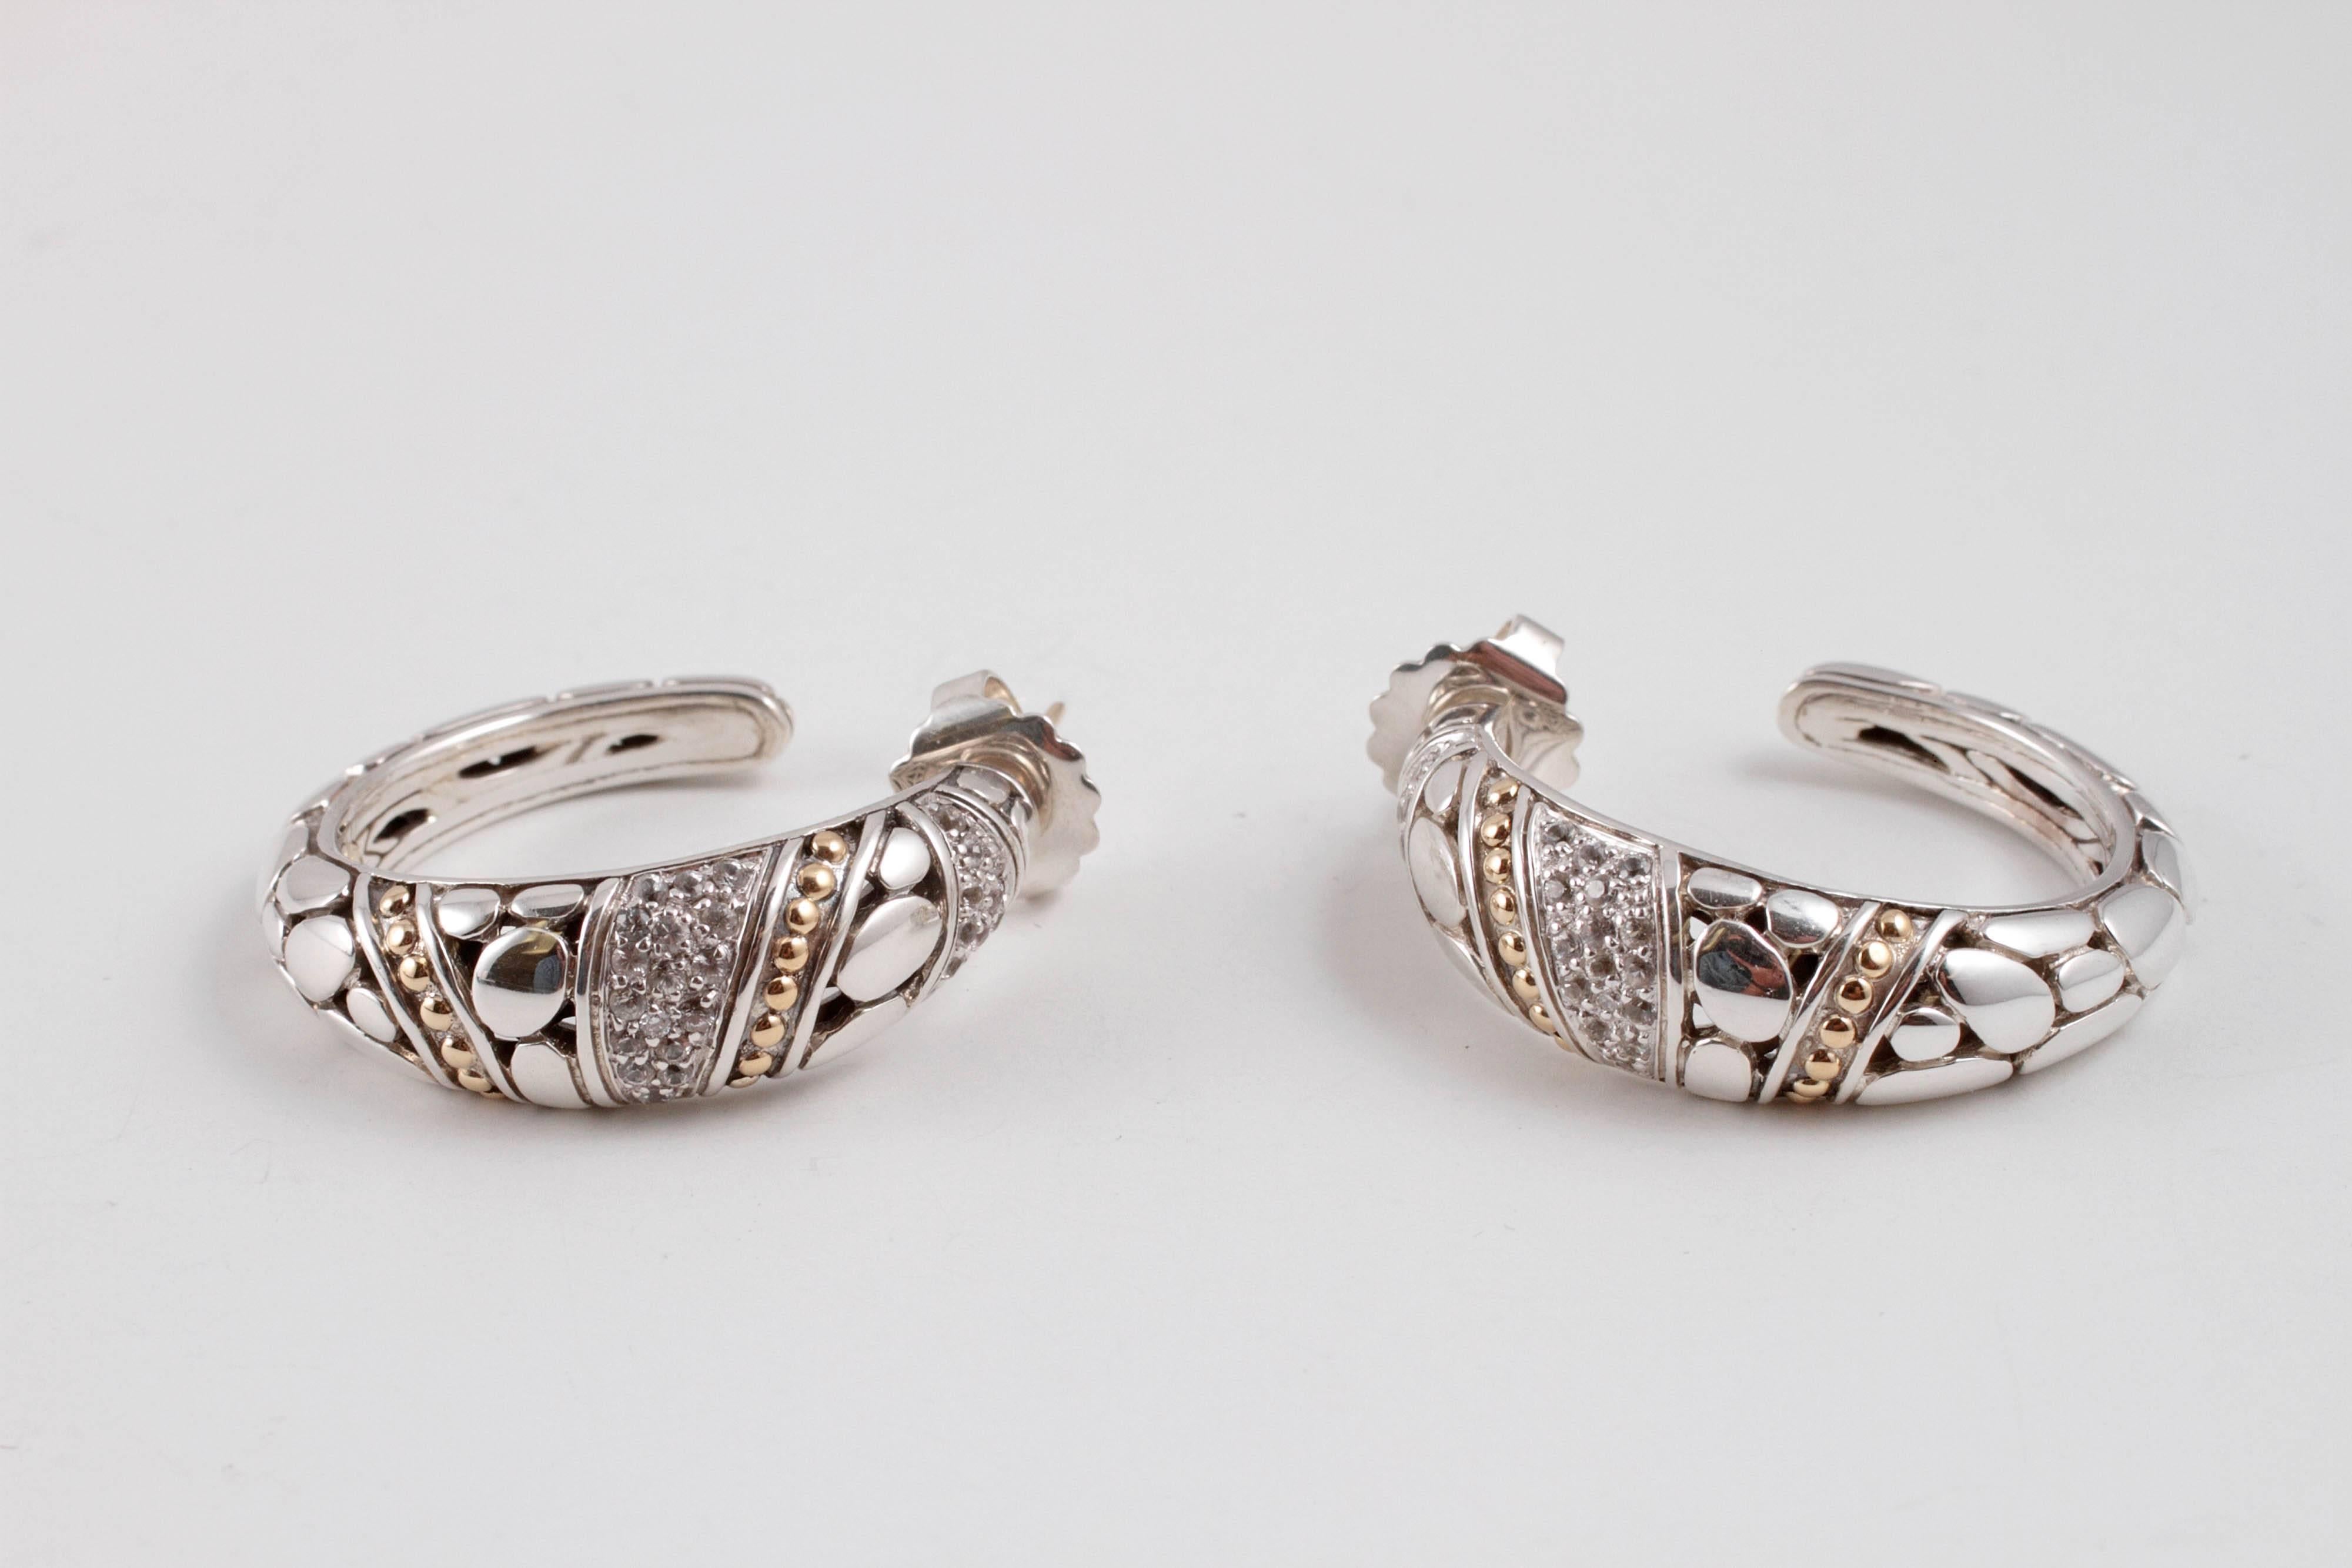 Love love these hoops!  In sterling silver with 18 karat yellow gold accents and bead-set, diamonds.  Classic treasures!